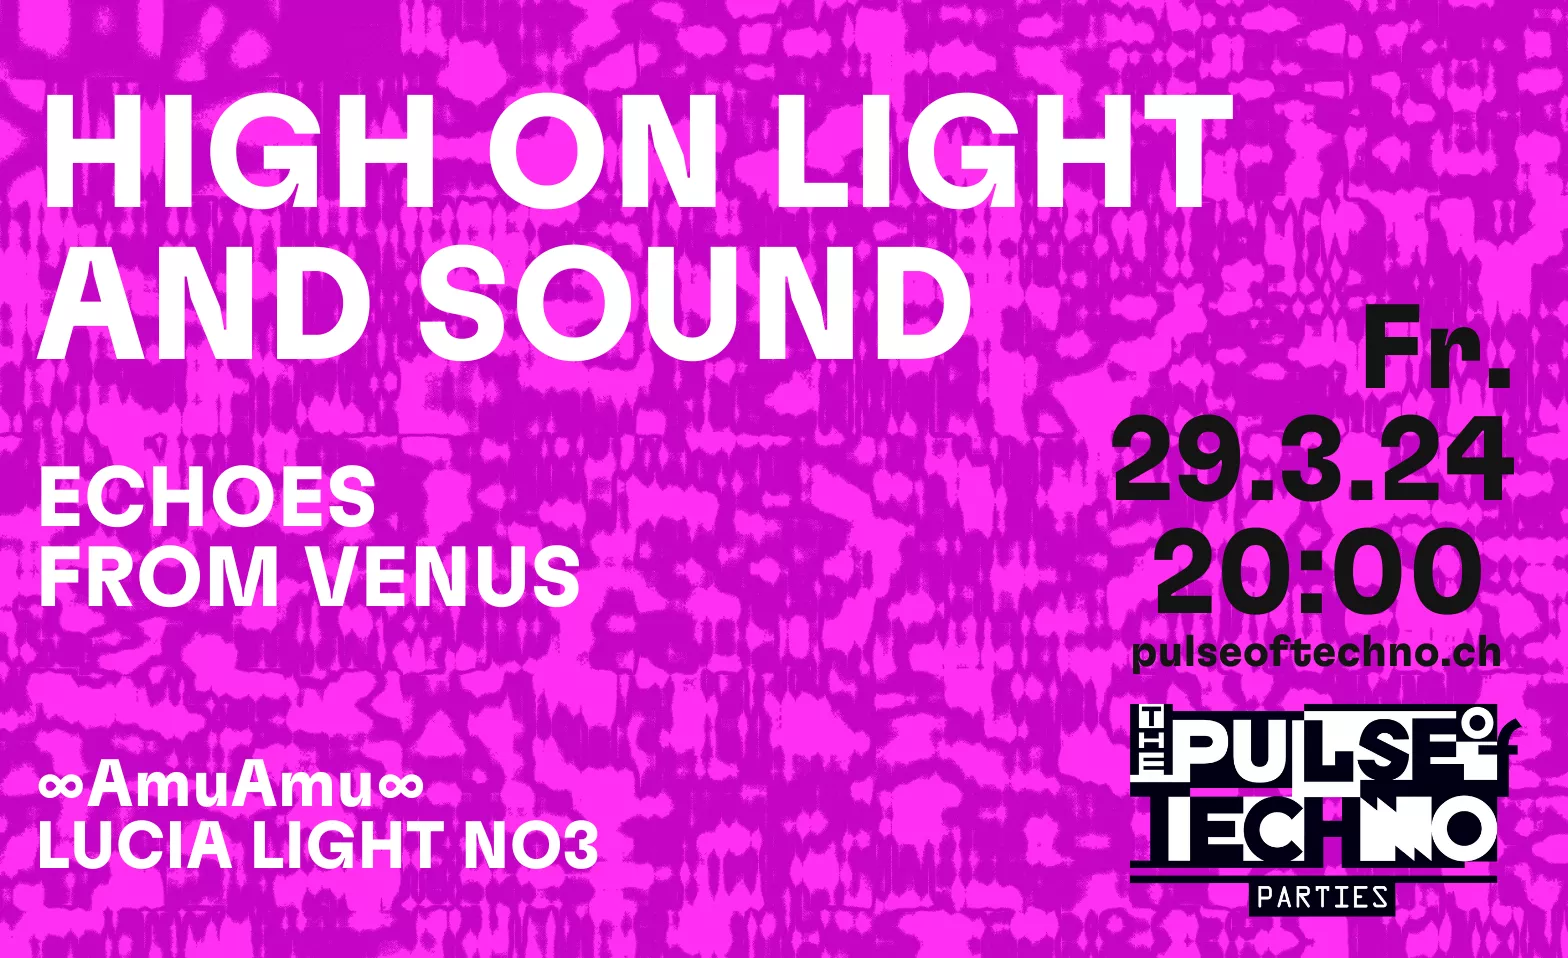 Event-Image for 'High on Light and Sound (Echoes from Venues)'